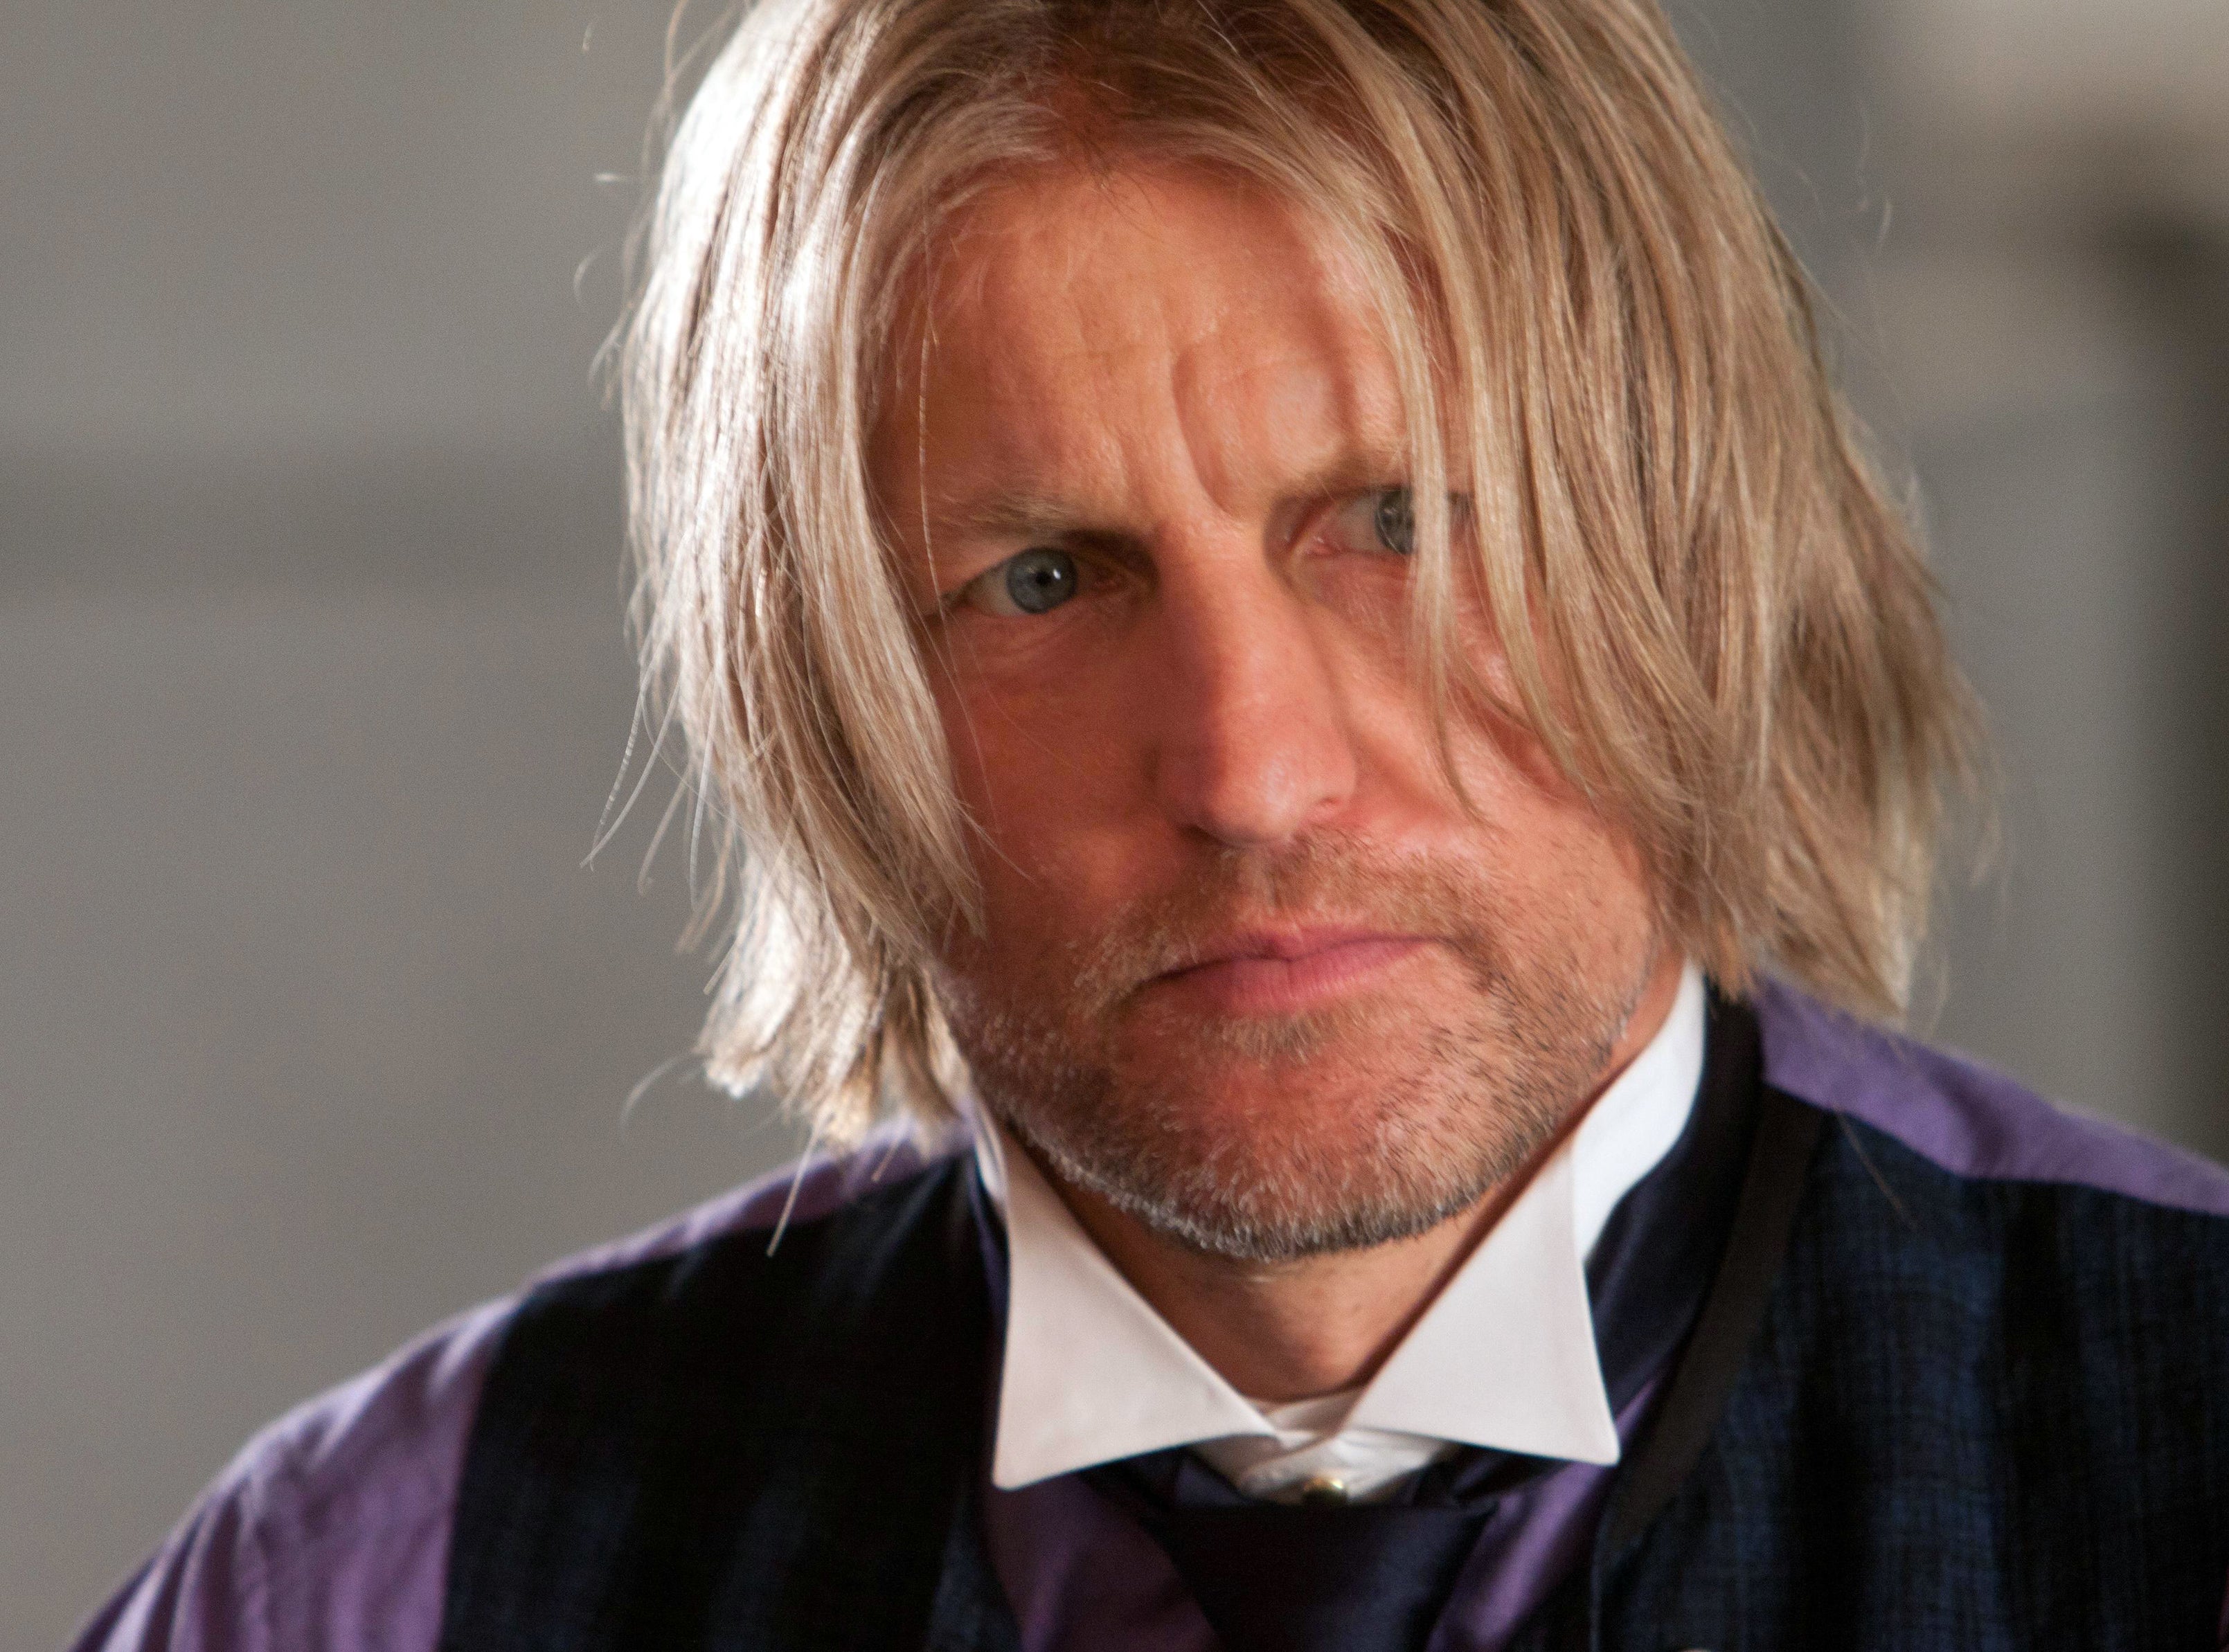 Haymitch in the films